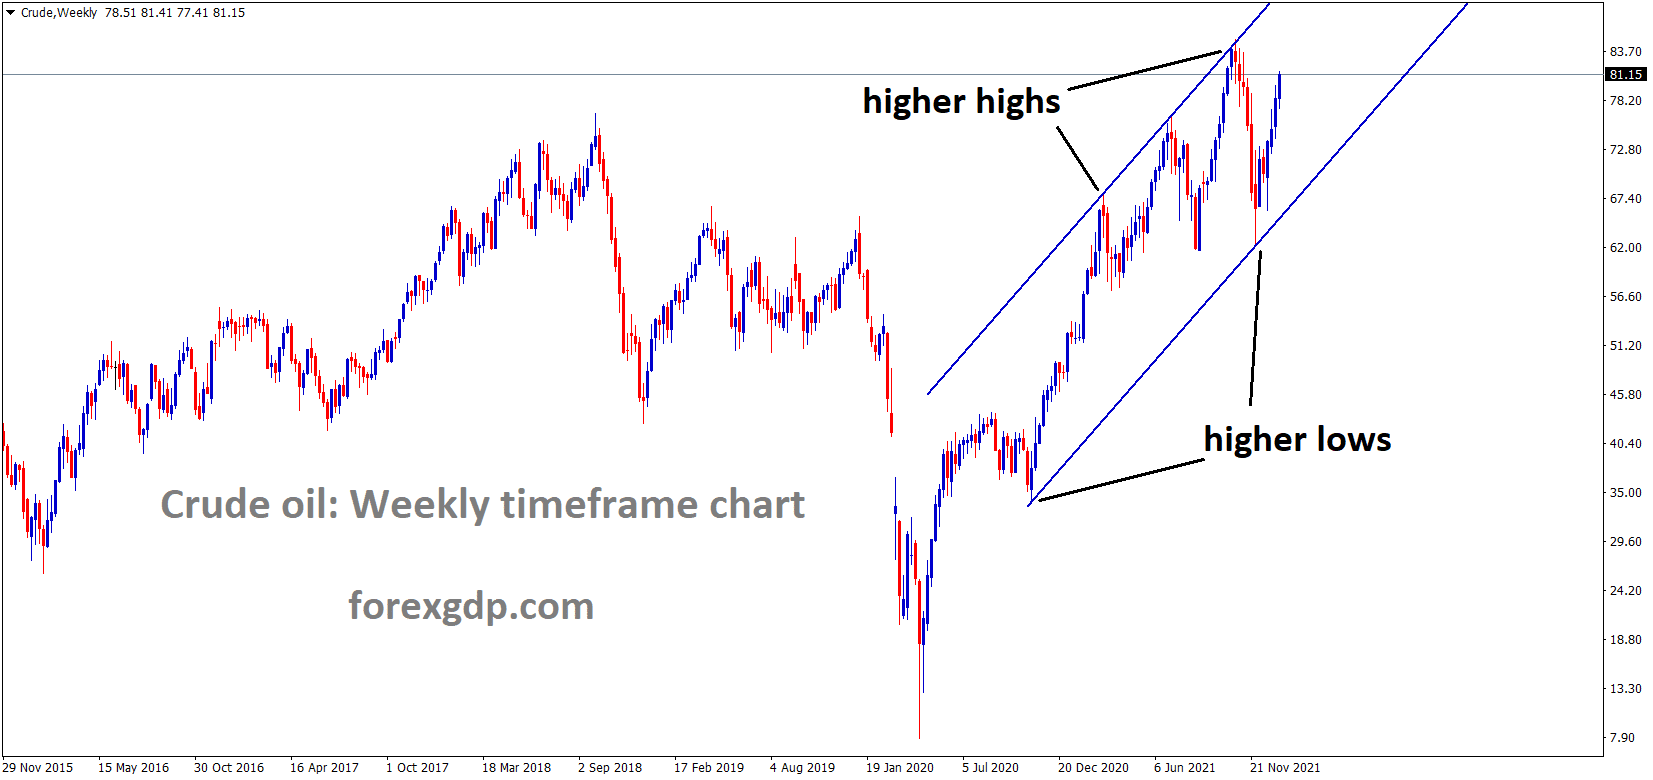 Crudeoil is moving in an Ascending channel and the market is rebounding from the higher low area of the channel